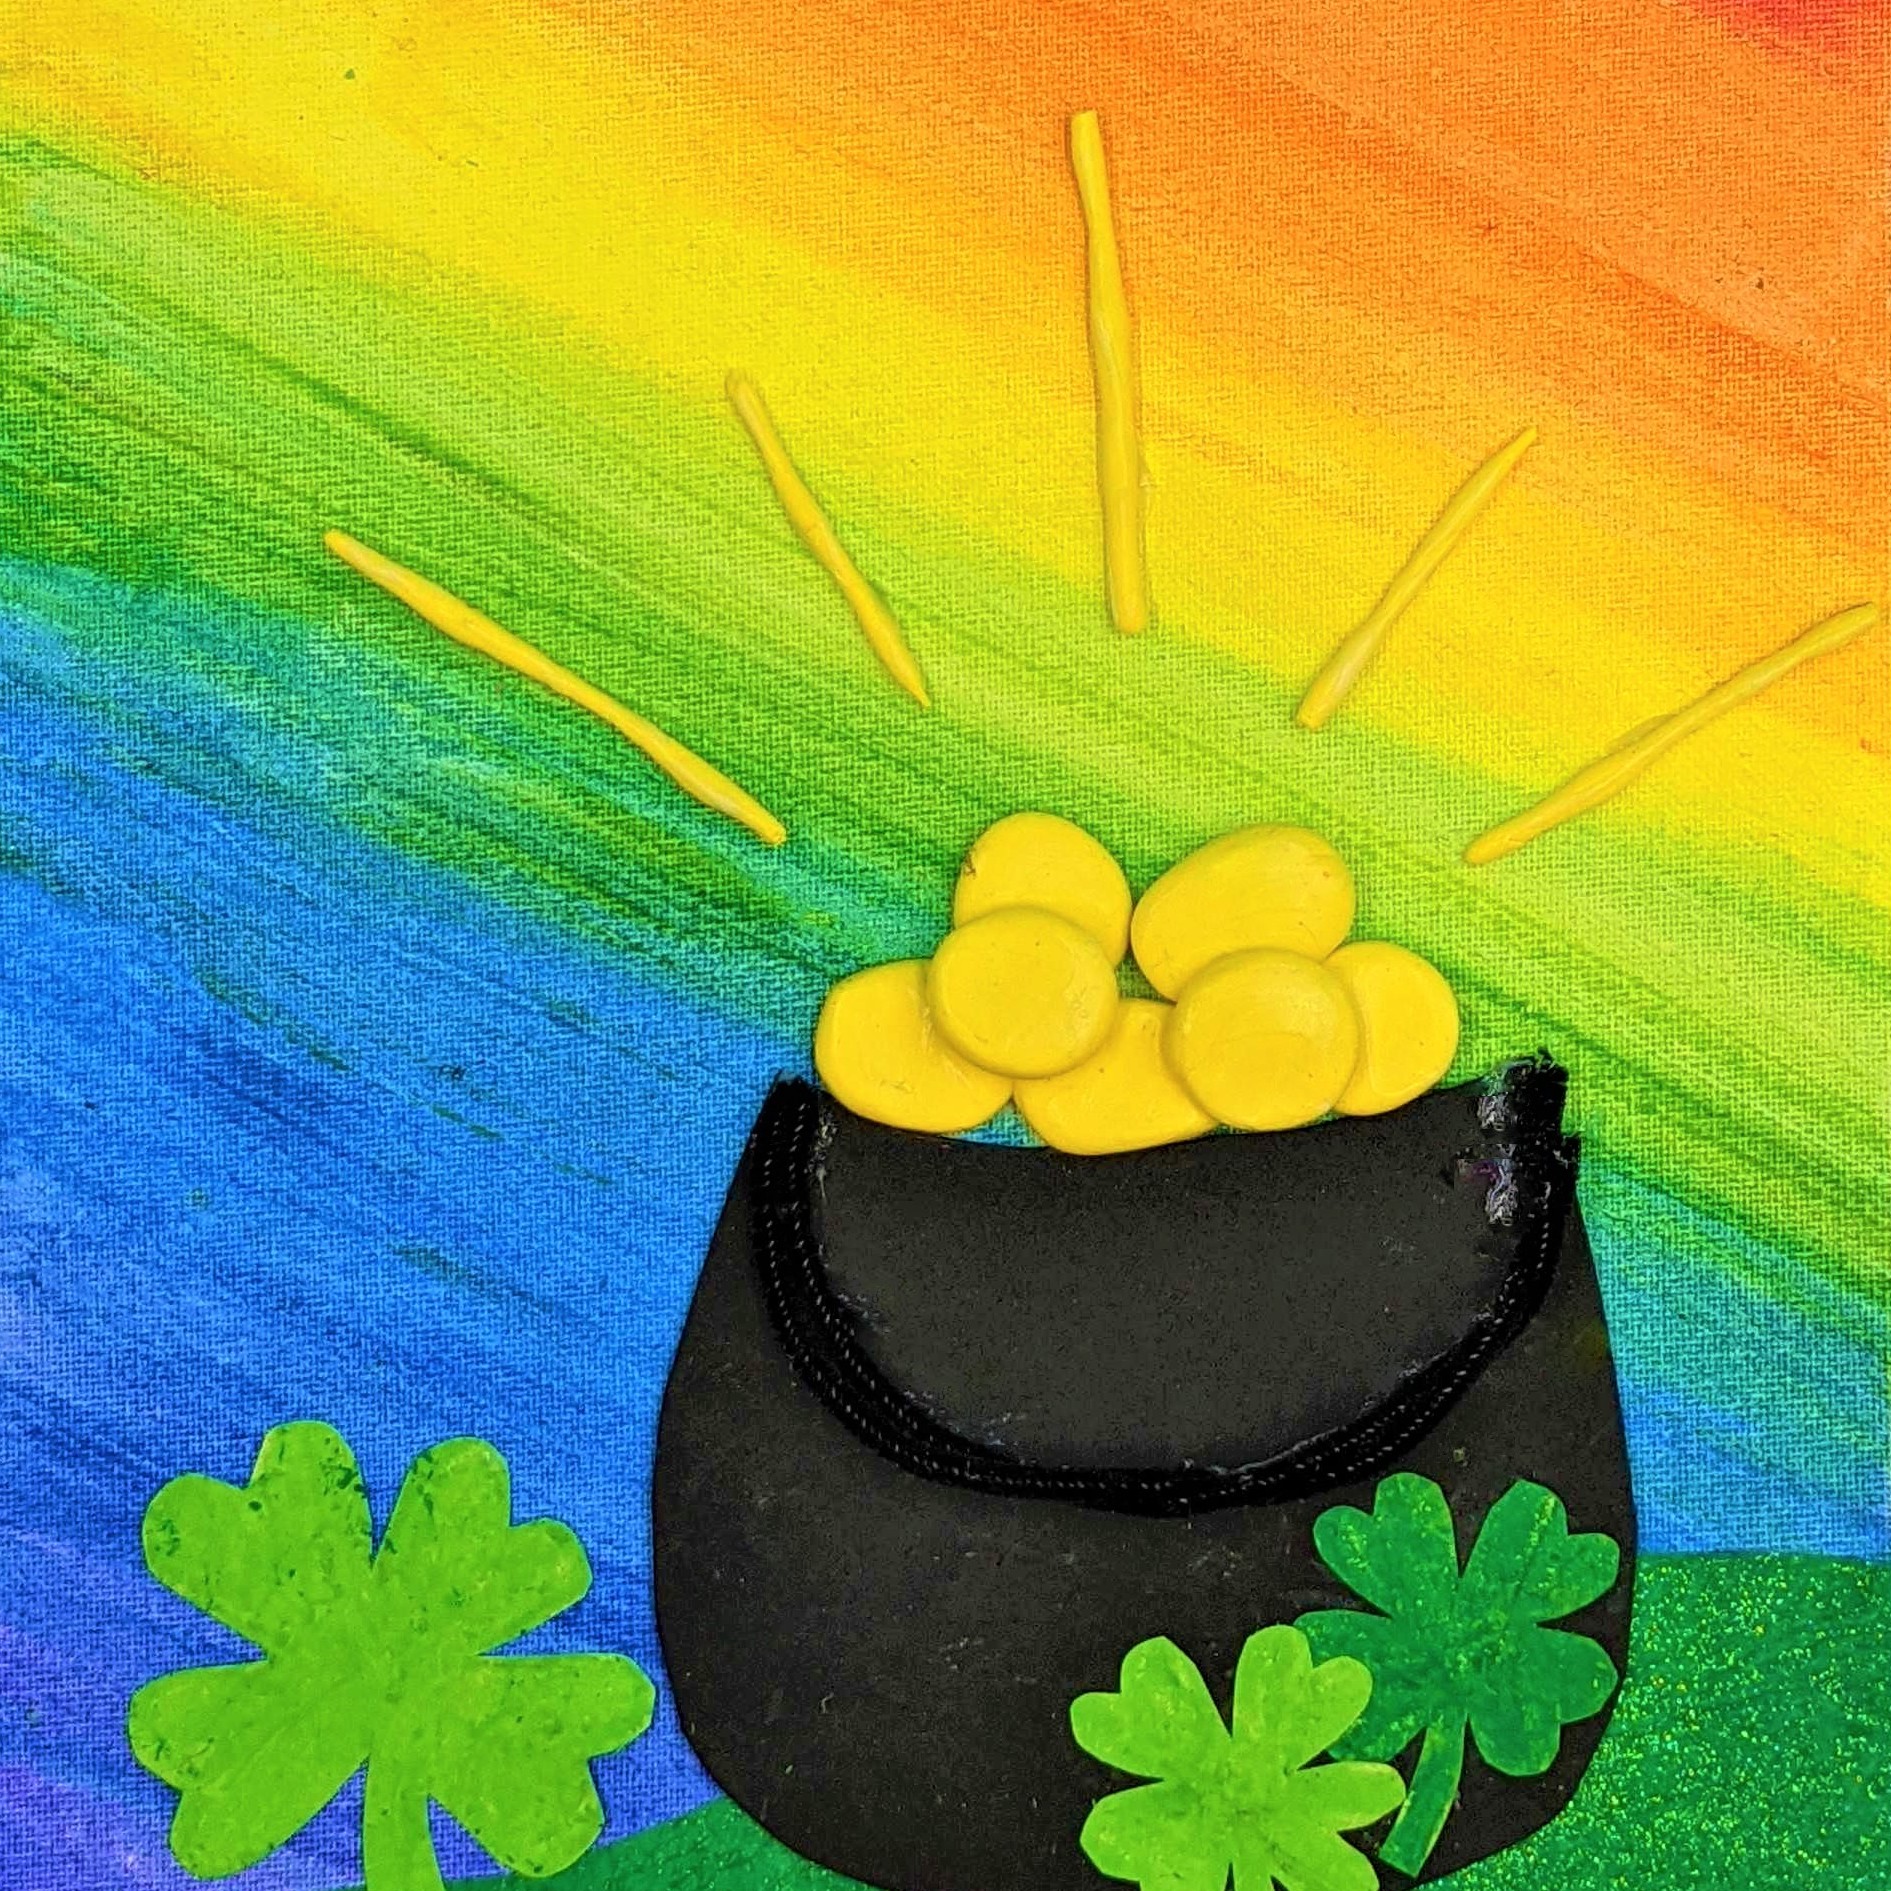 Kidcreate Studio - Chicago Lakeview, St. Patrick's Day Rainbow on Canvas Art Project